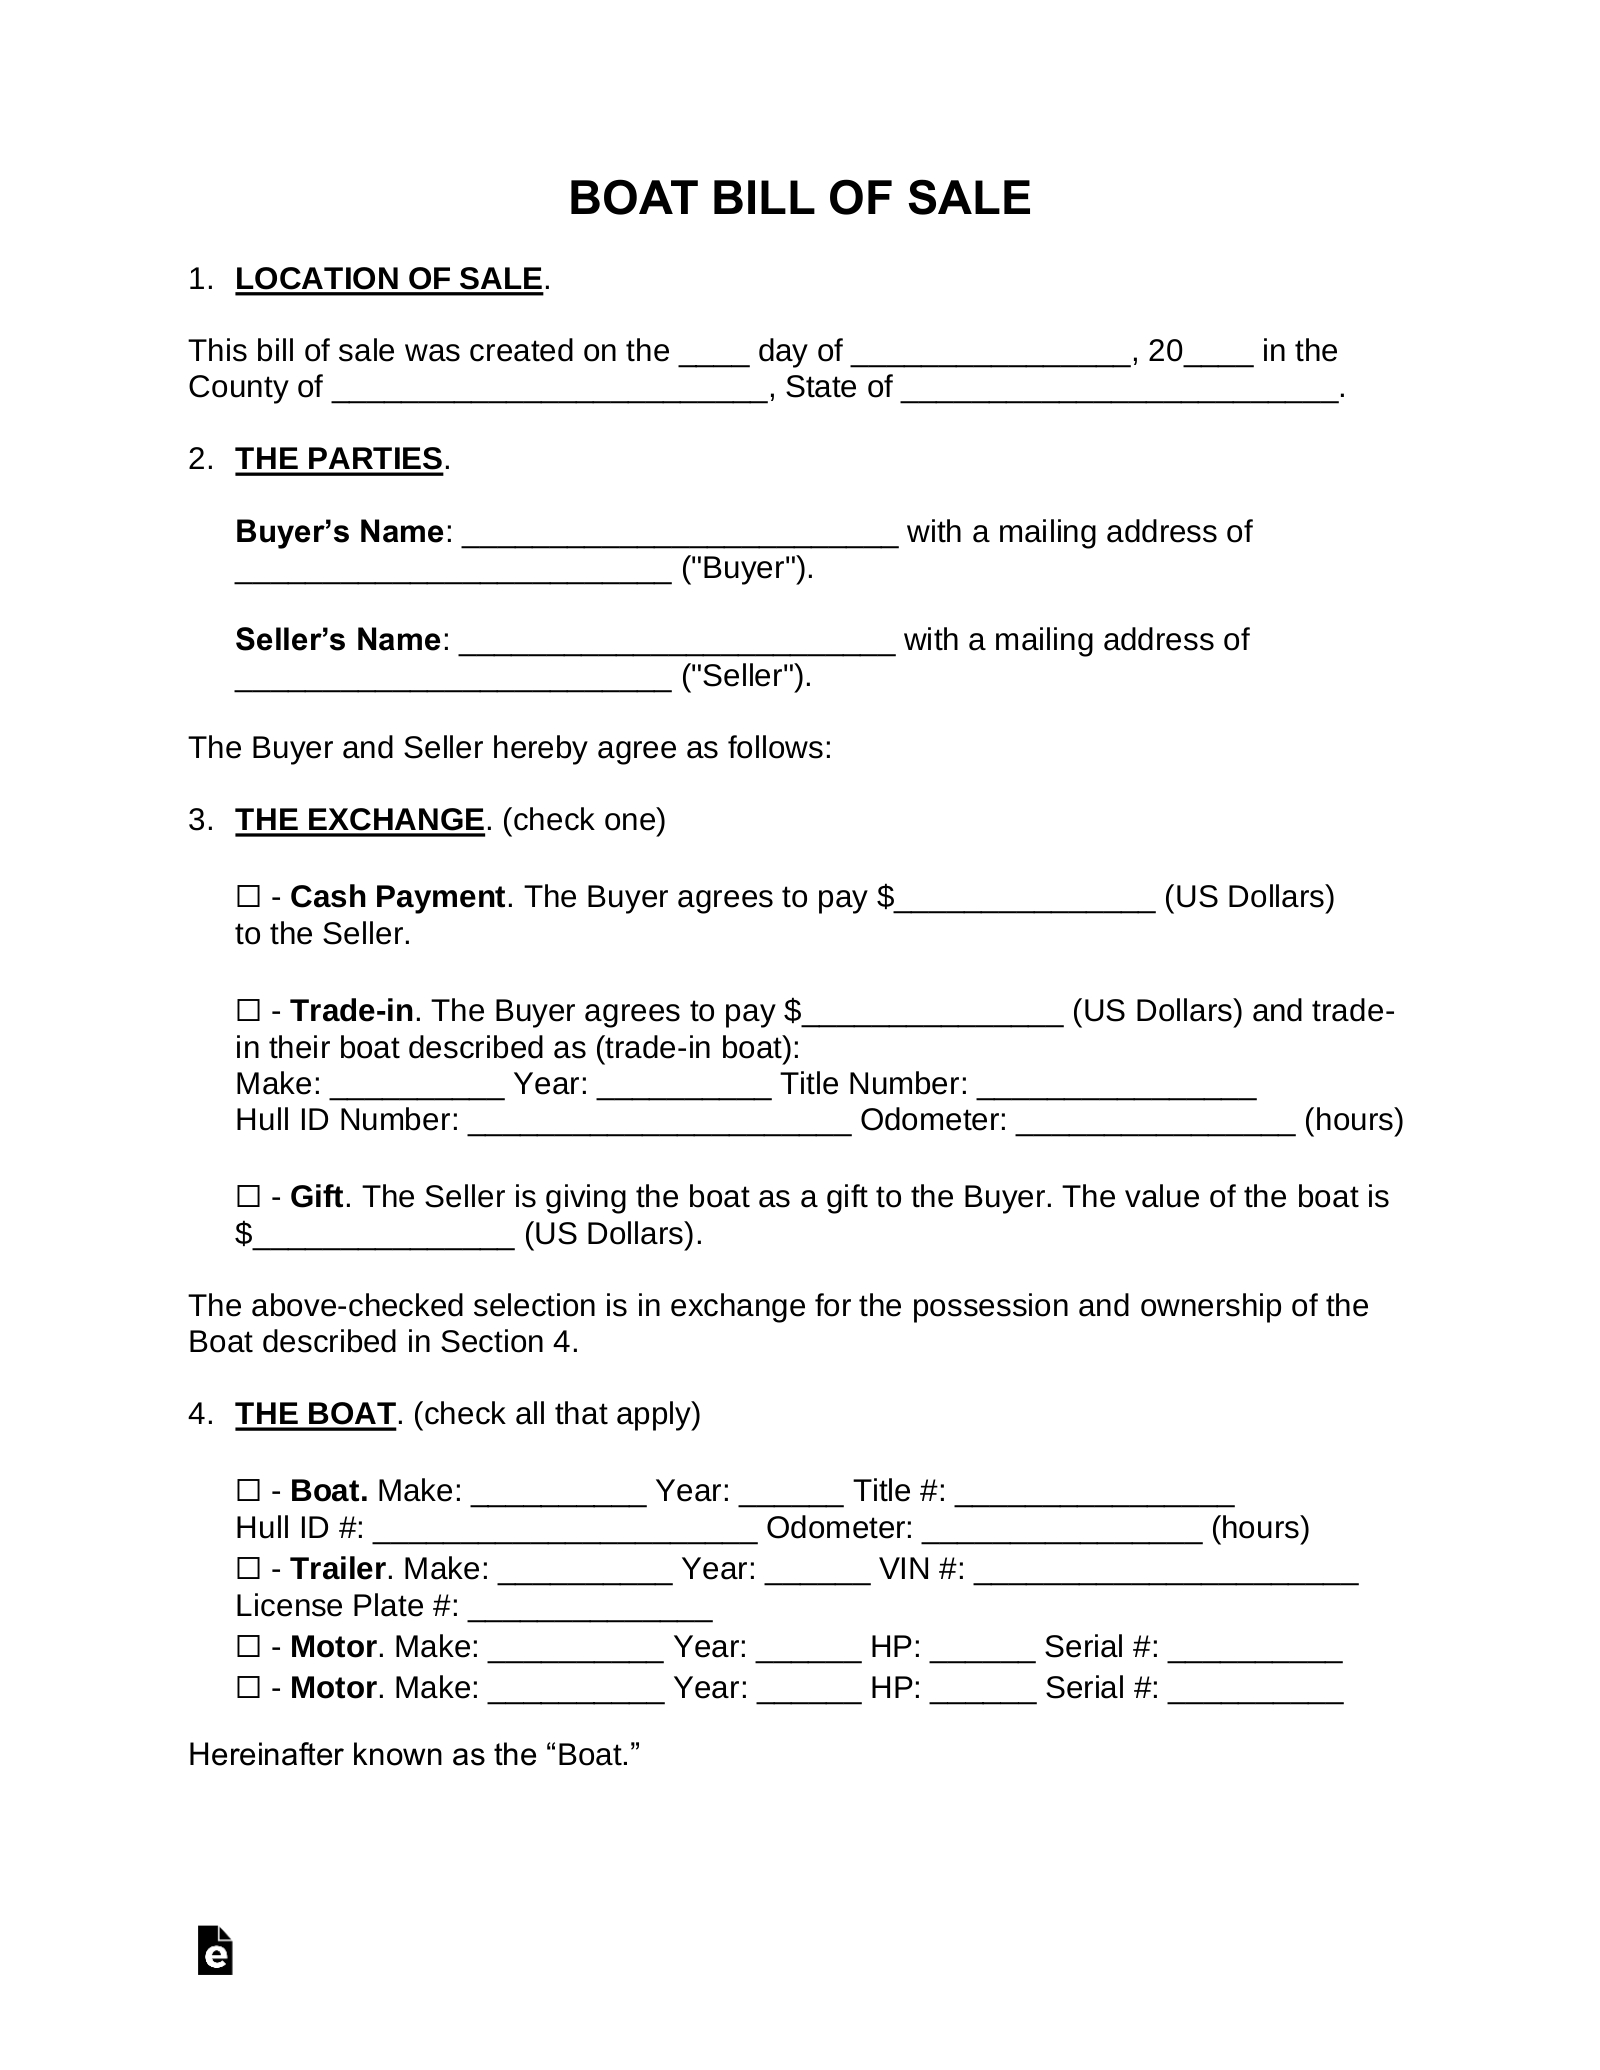 Free Boat Bill Of Sale Form - Pdf | Word – Eforms - Free Printable Bill Of Sale For Boat Trailer